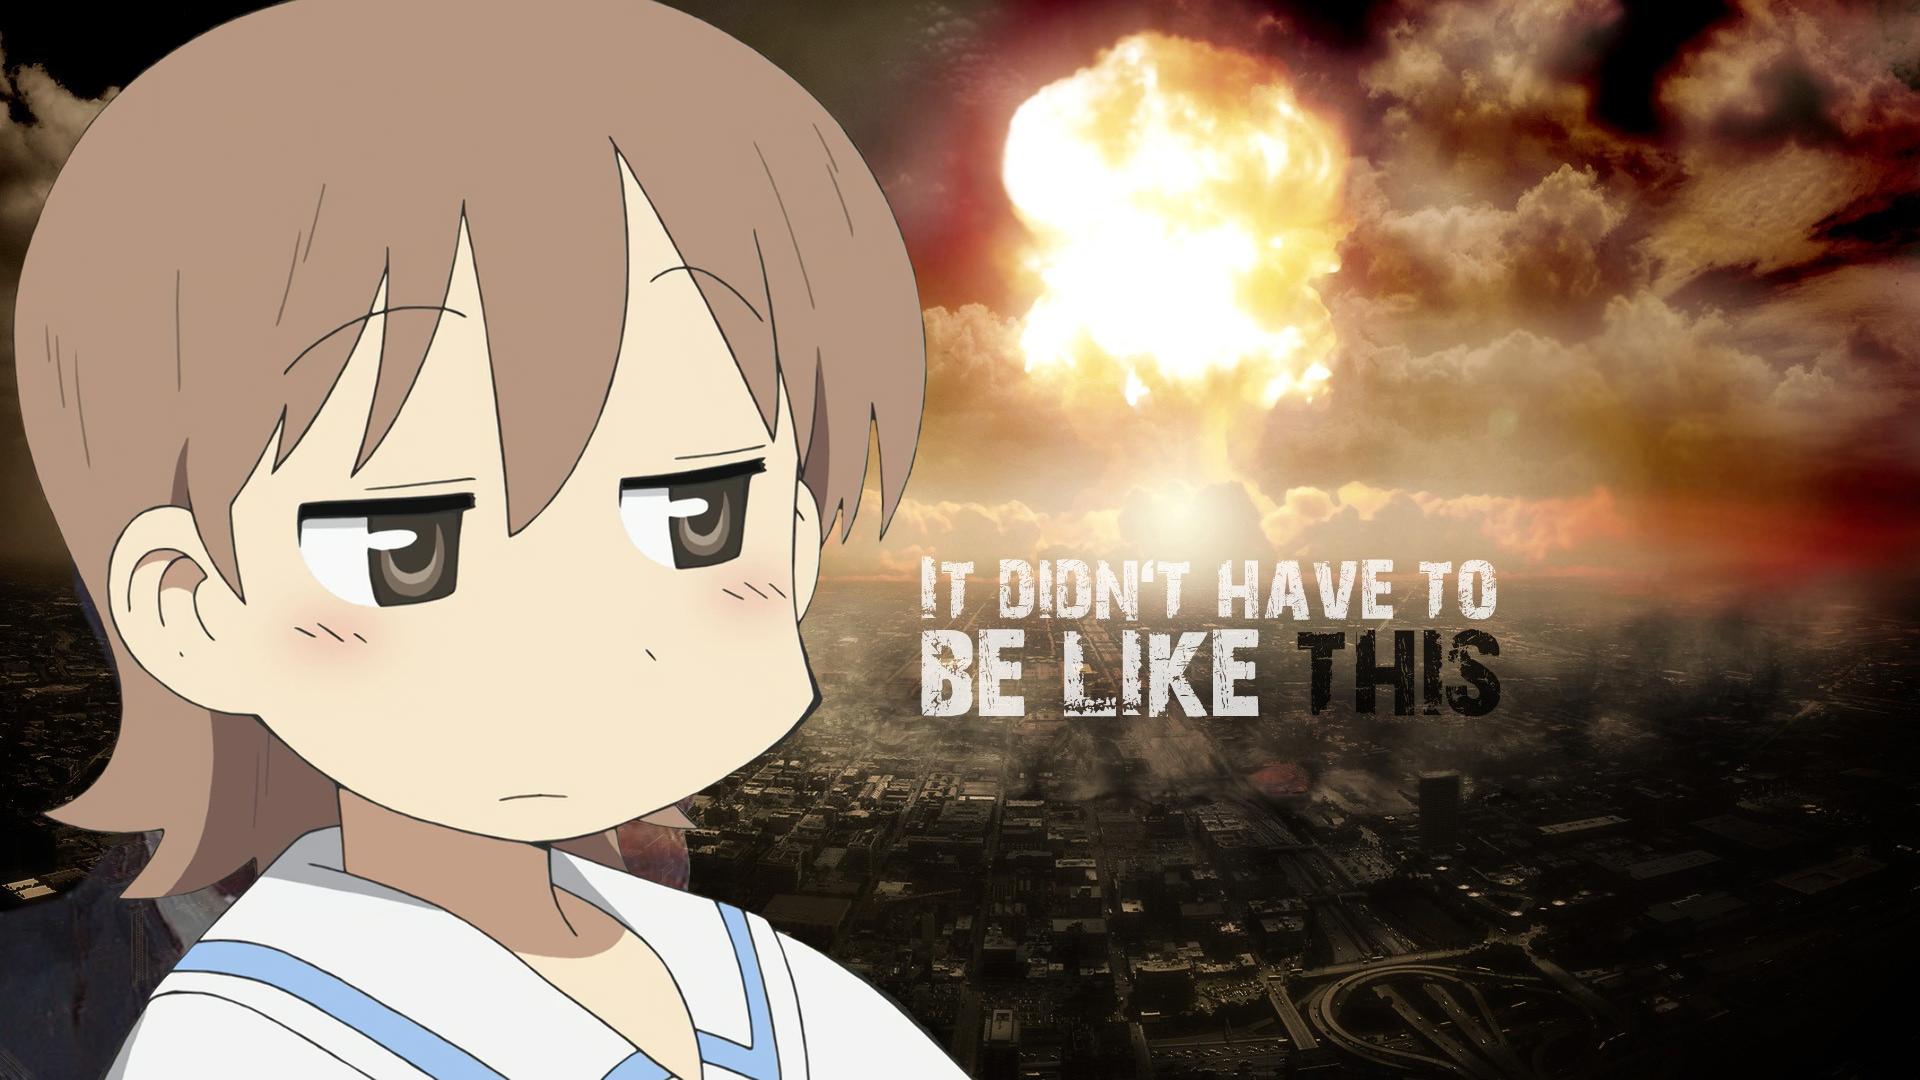 It didn't have to be like this - Nichijou Wallpaper (37615319) - Fanpop